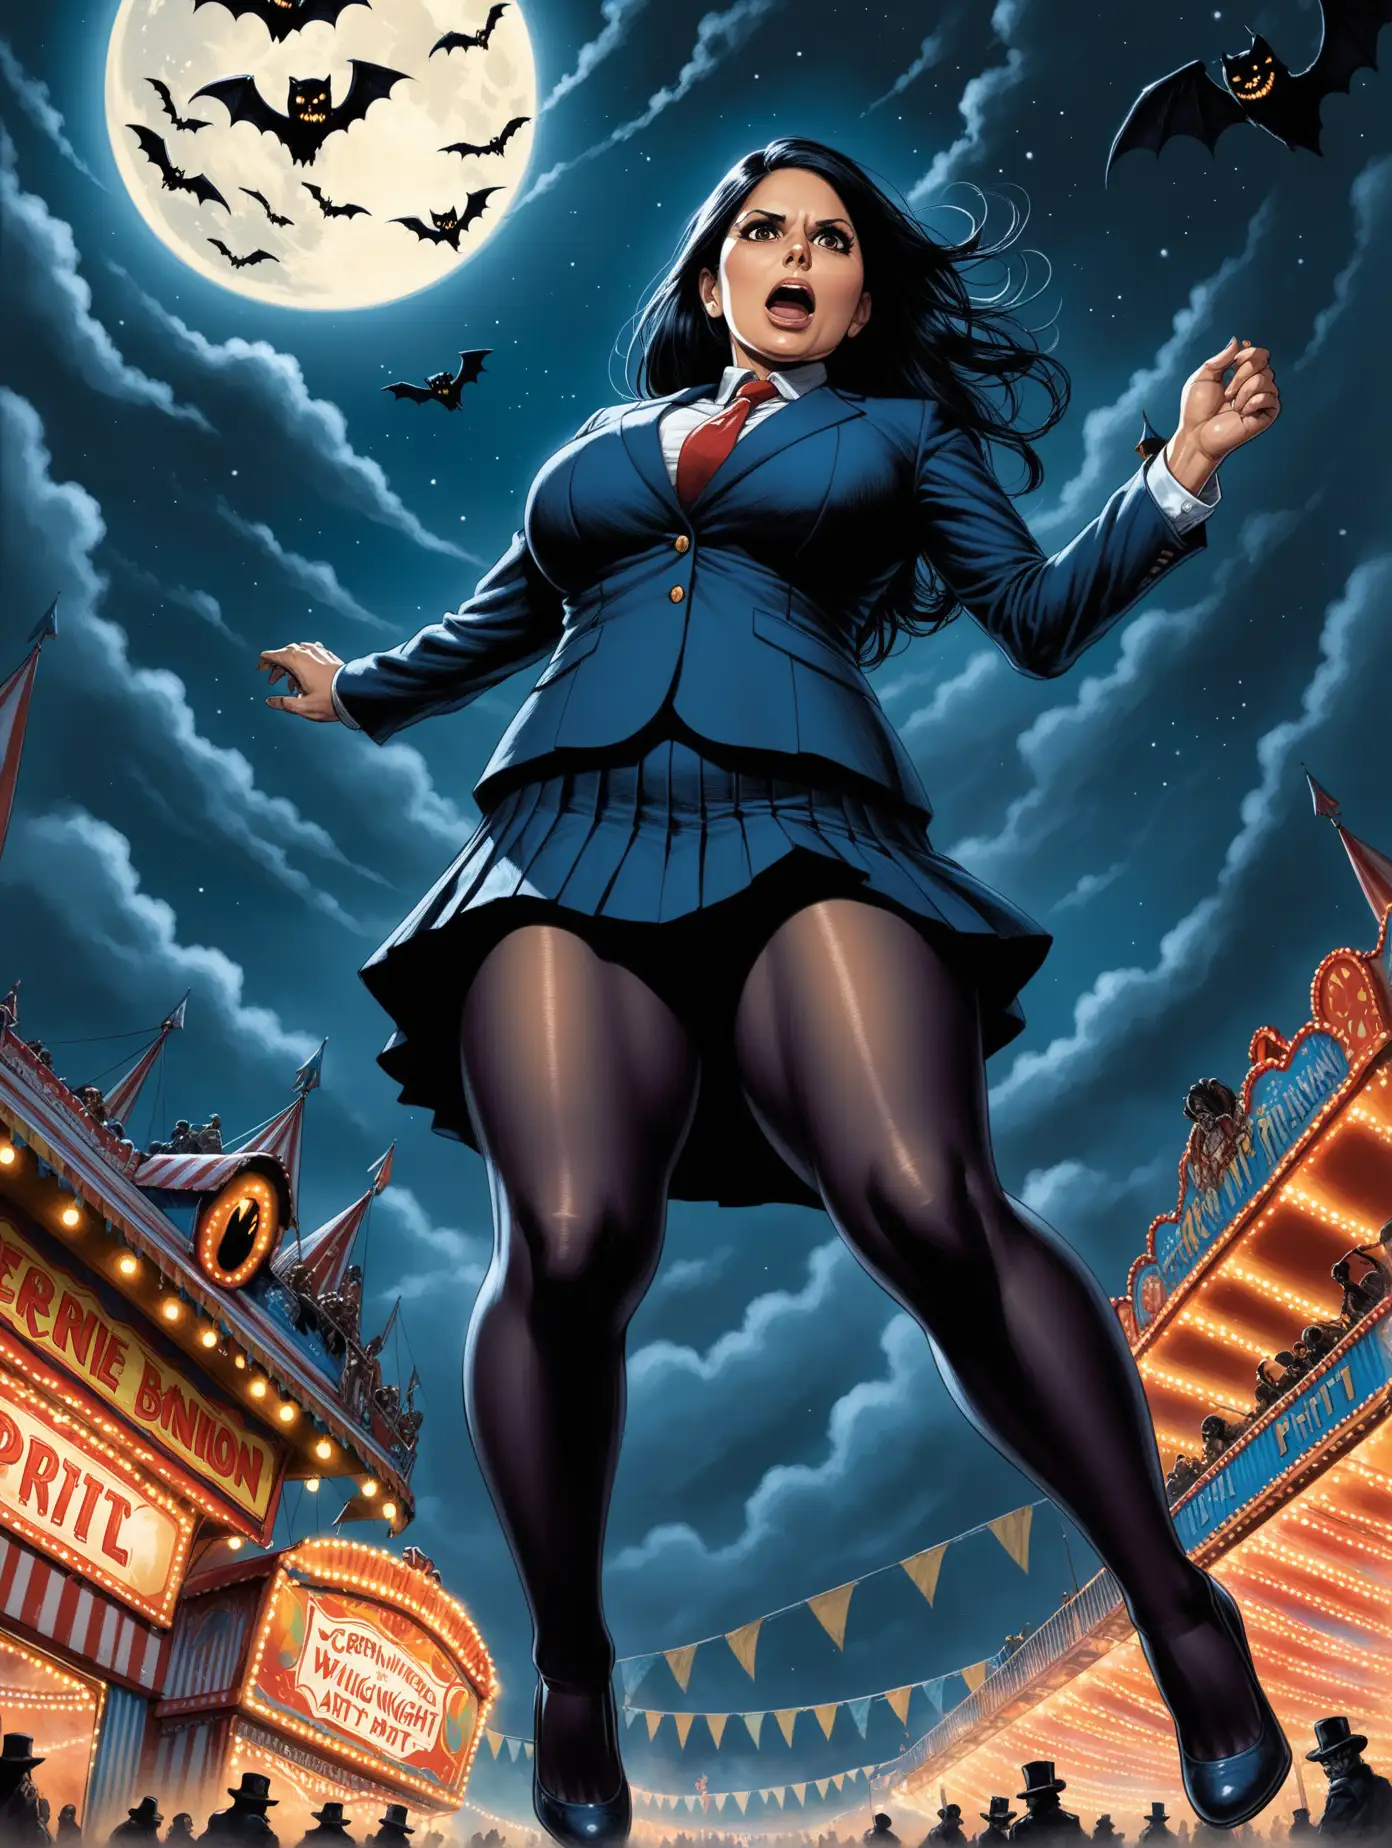 Voluptuous,  Mature Priti Patel, short pleated navy skirt suit, wide stance at carnival[Highly Detailed] Bernie Wrightson art style, below angle, navy pantyhose, spooky night, realistic, skirt lifting up, looking down in disbelief, feet dangling